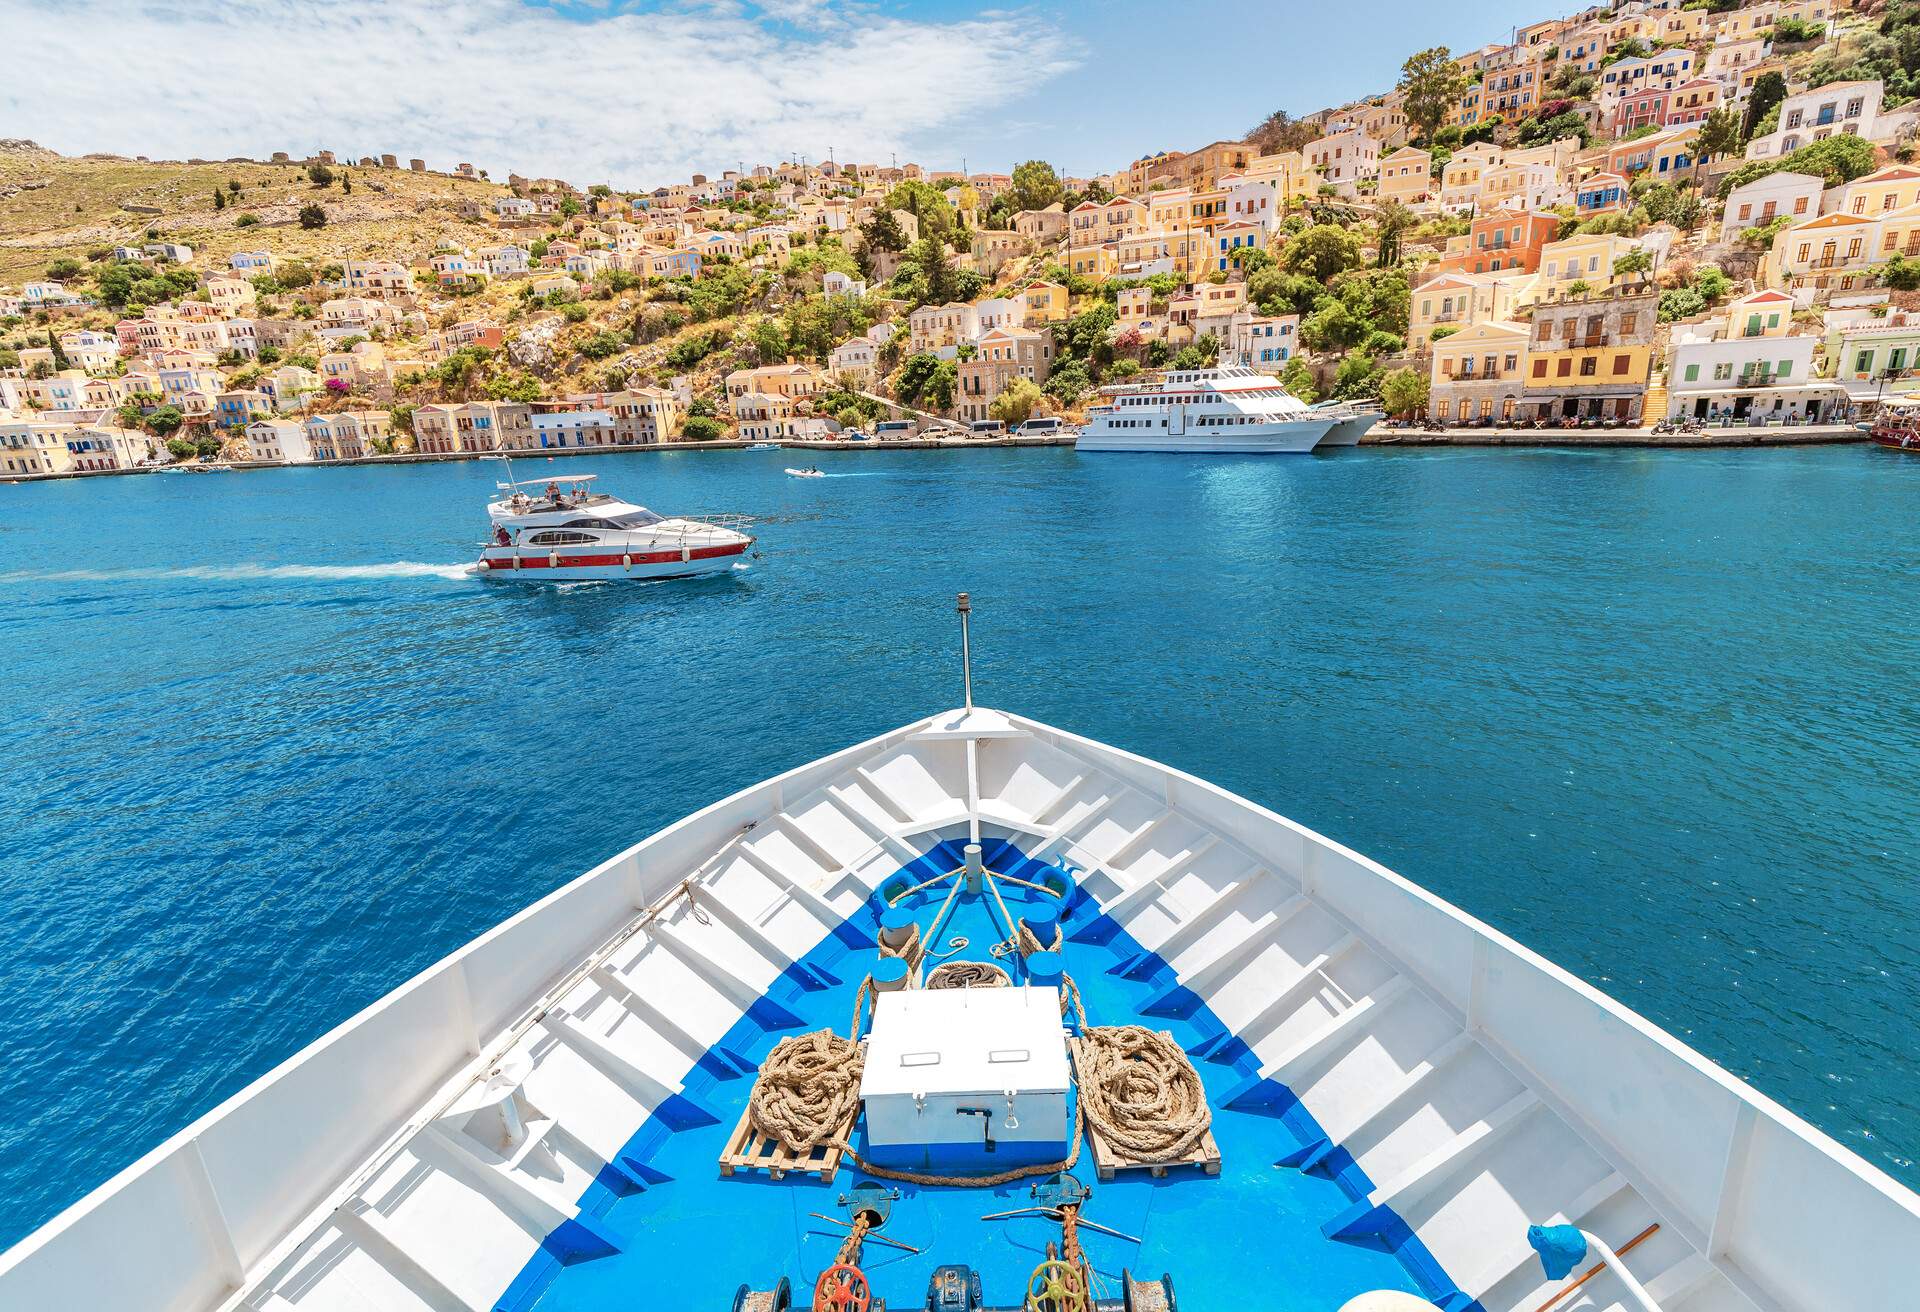 The bow of the cruise ship overlooking the tourist attraction - the city and the island of Symi, Greece